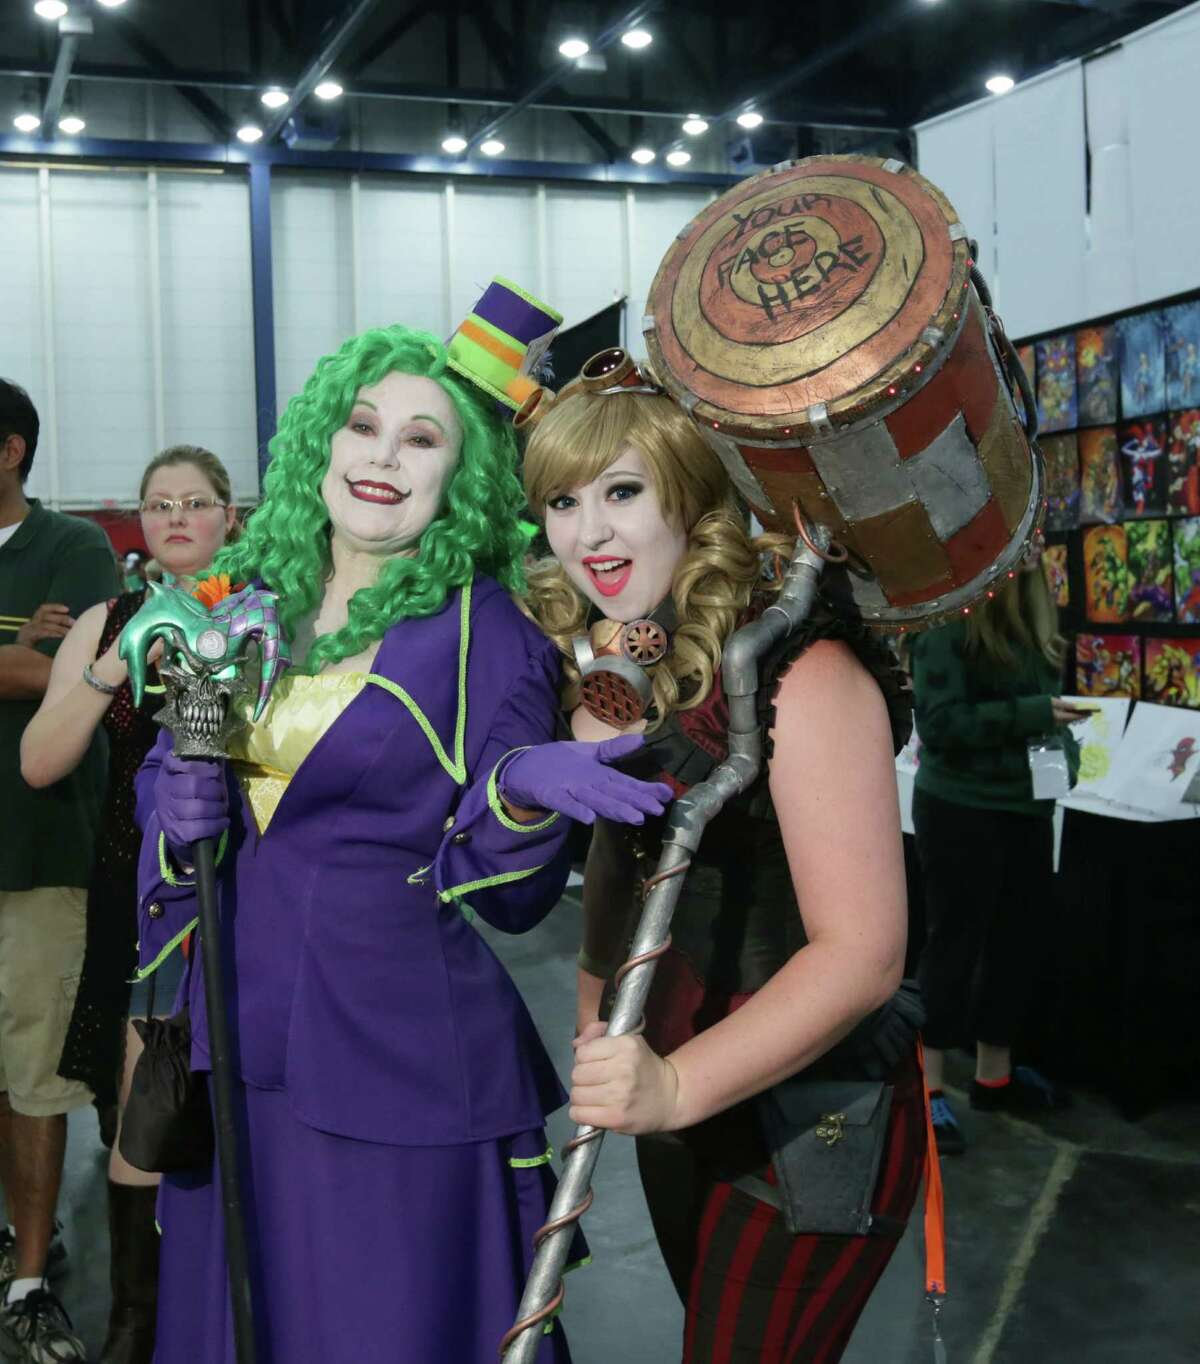 Photos See fans in amazing costumes at Houston comic con